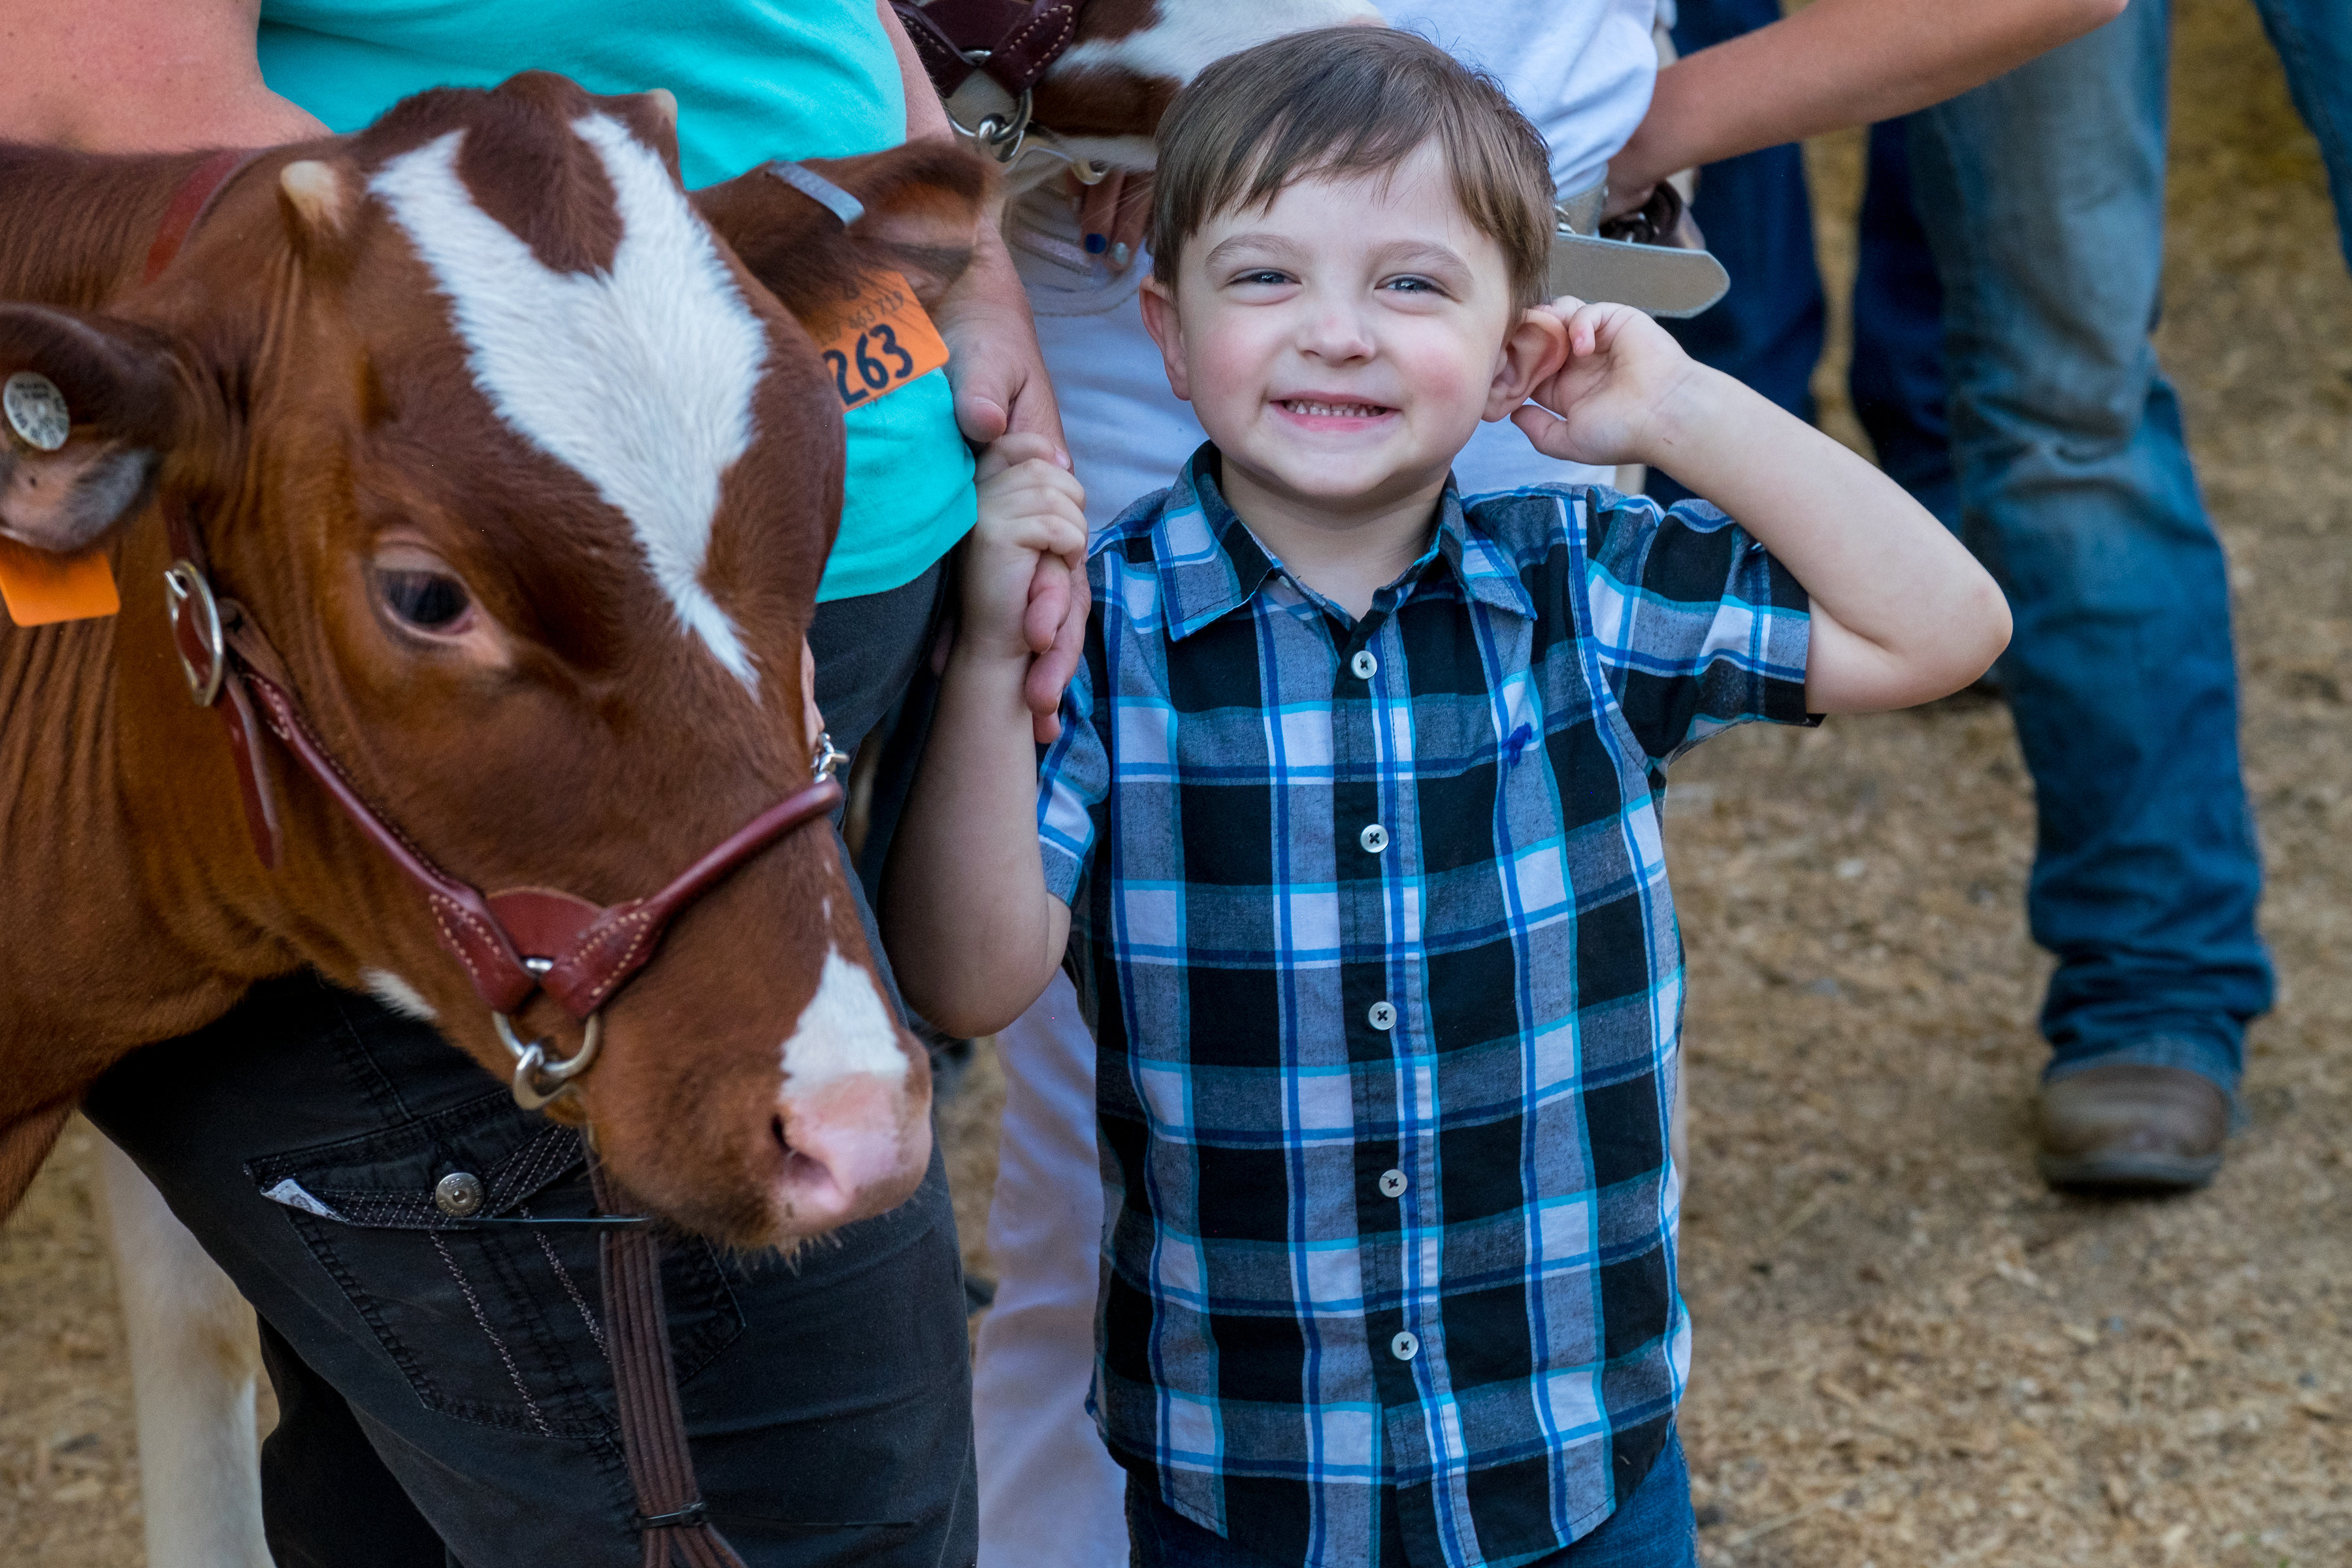 little boy next a cow posing for photo